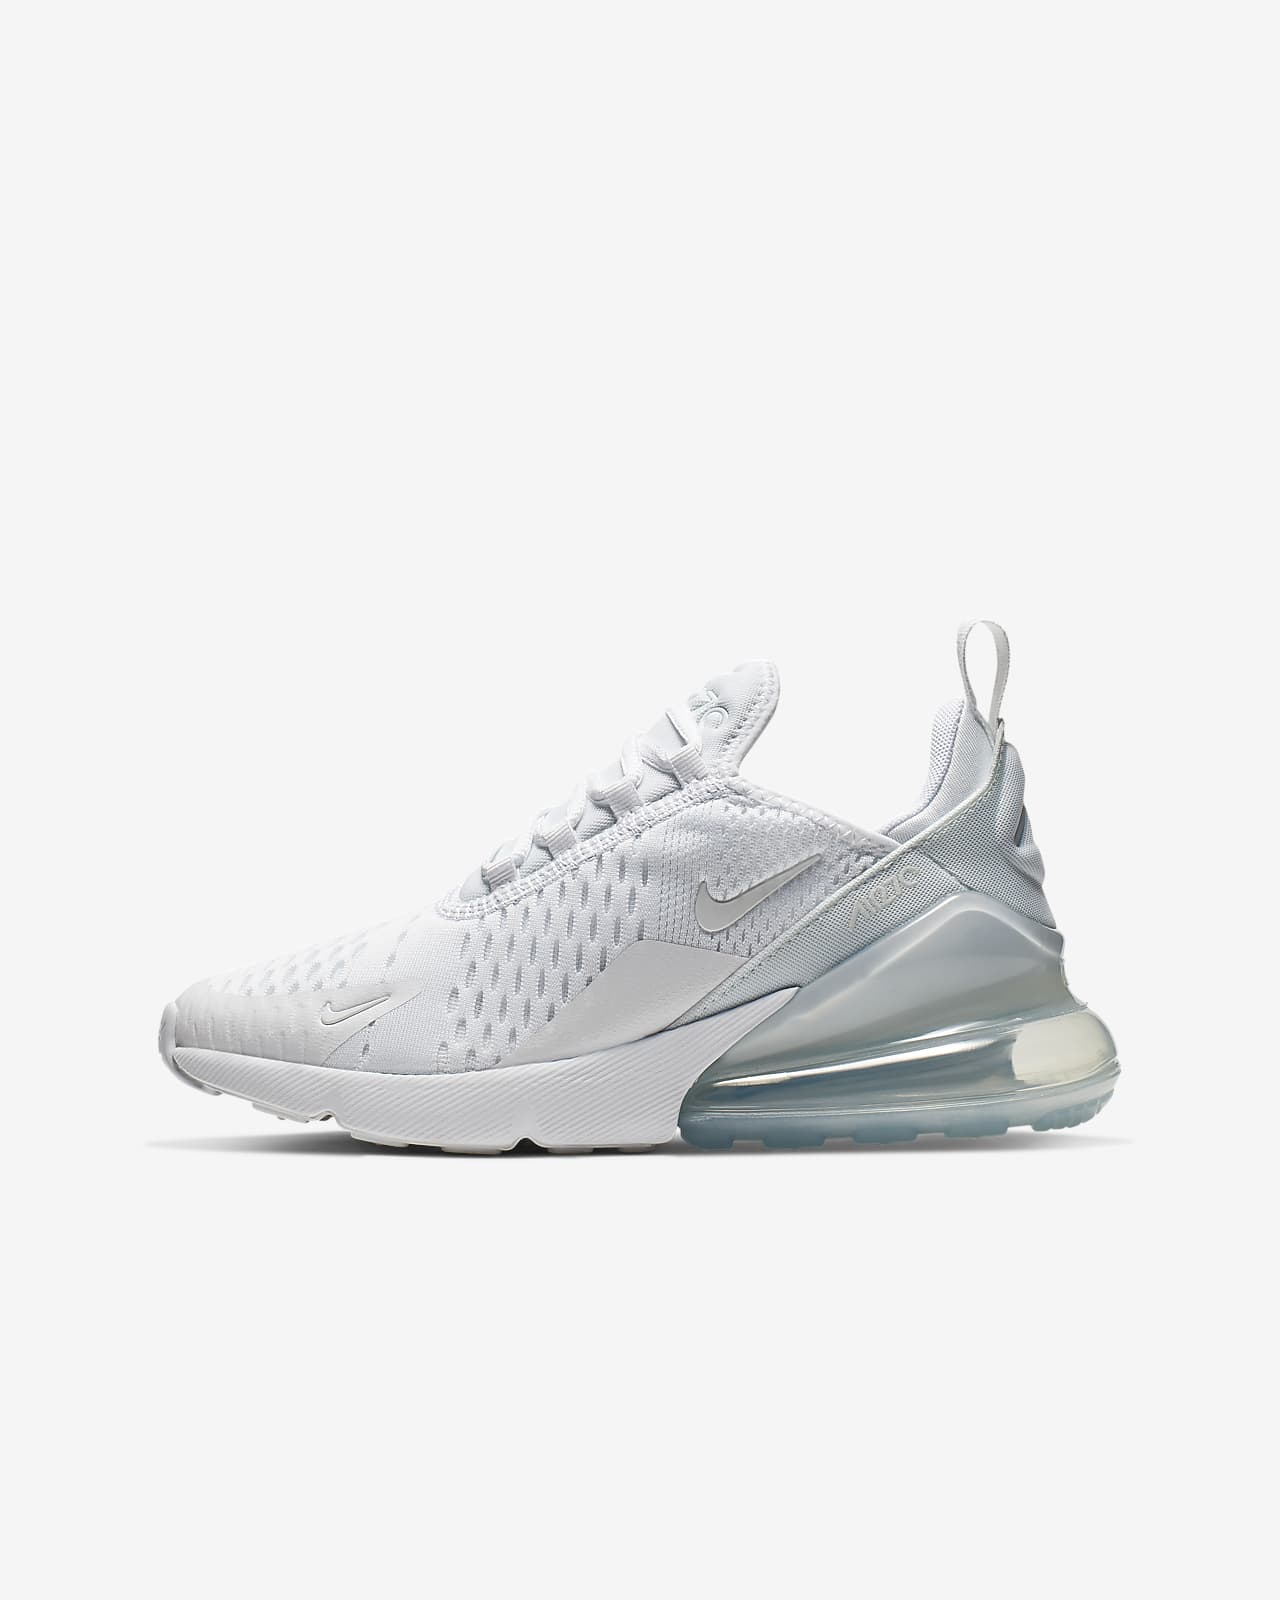 https://static.nike.com/a/images/t_PDP_1280_v1/f_auto,q_auto:eco/eehabecsfly0wy1pxxve/sapatilhas-air-max-270-junior-MLXfXG.png